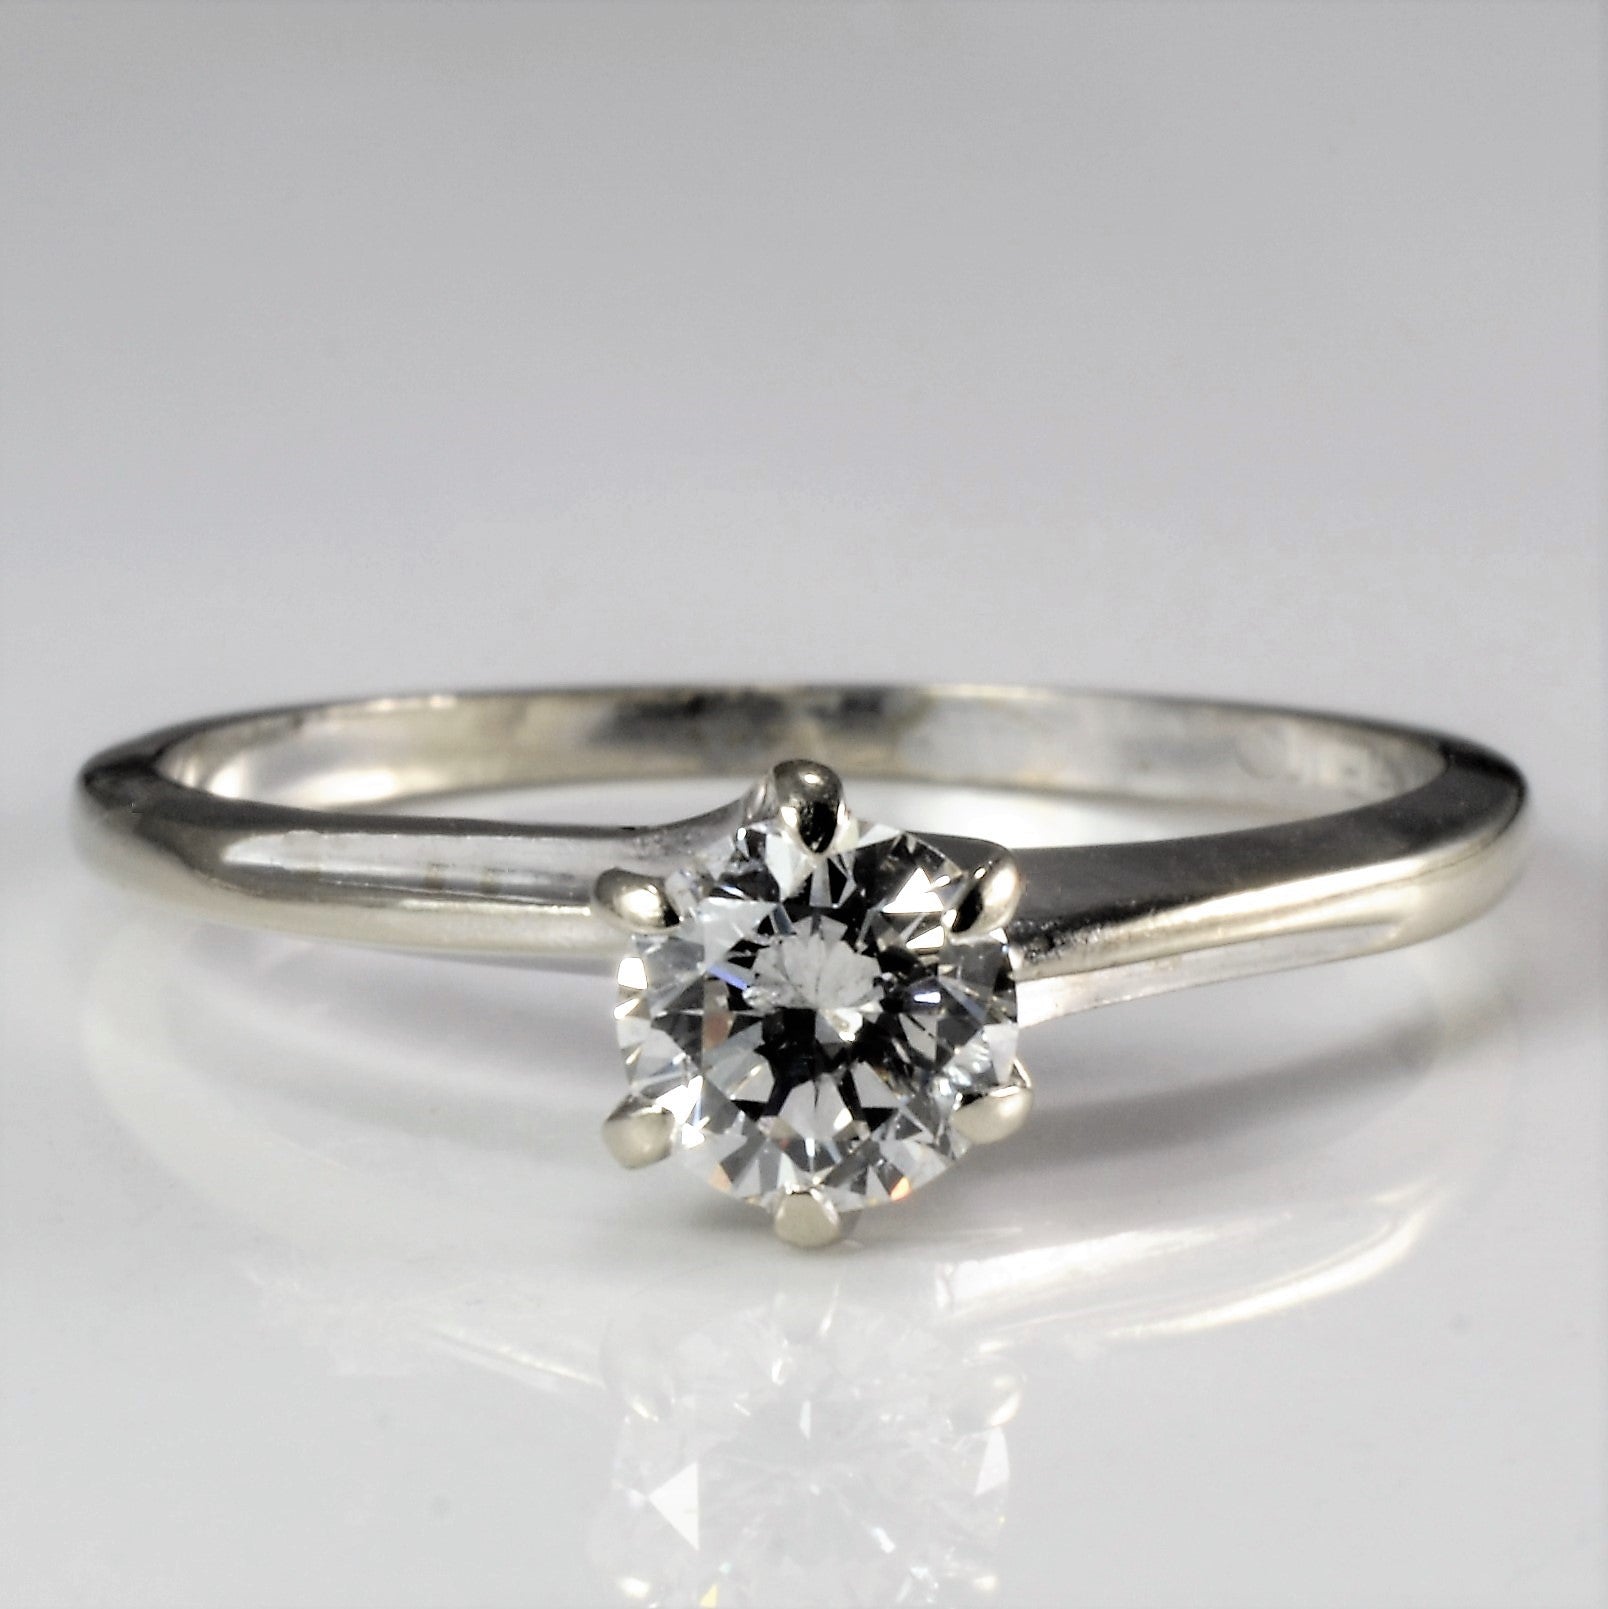 Six Prong Solitaire Diamond Engagement Ring | 0.39 ct, SZ 6.5 |